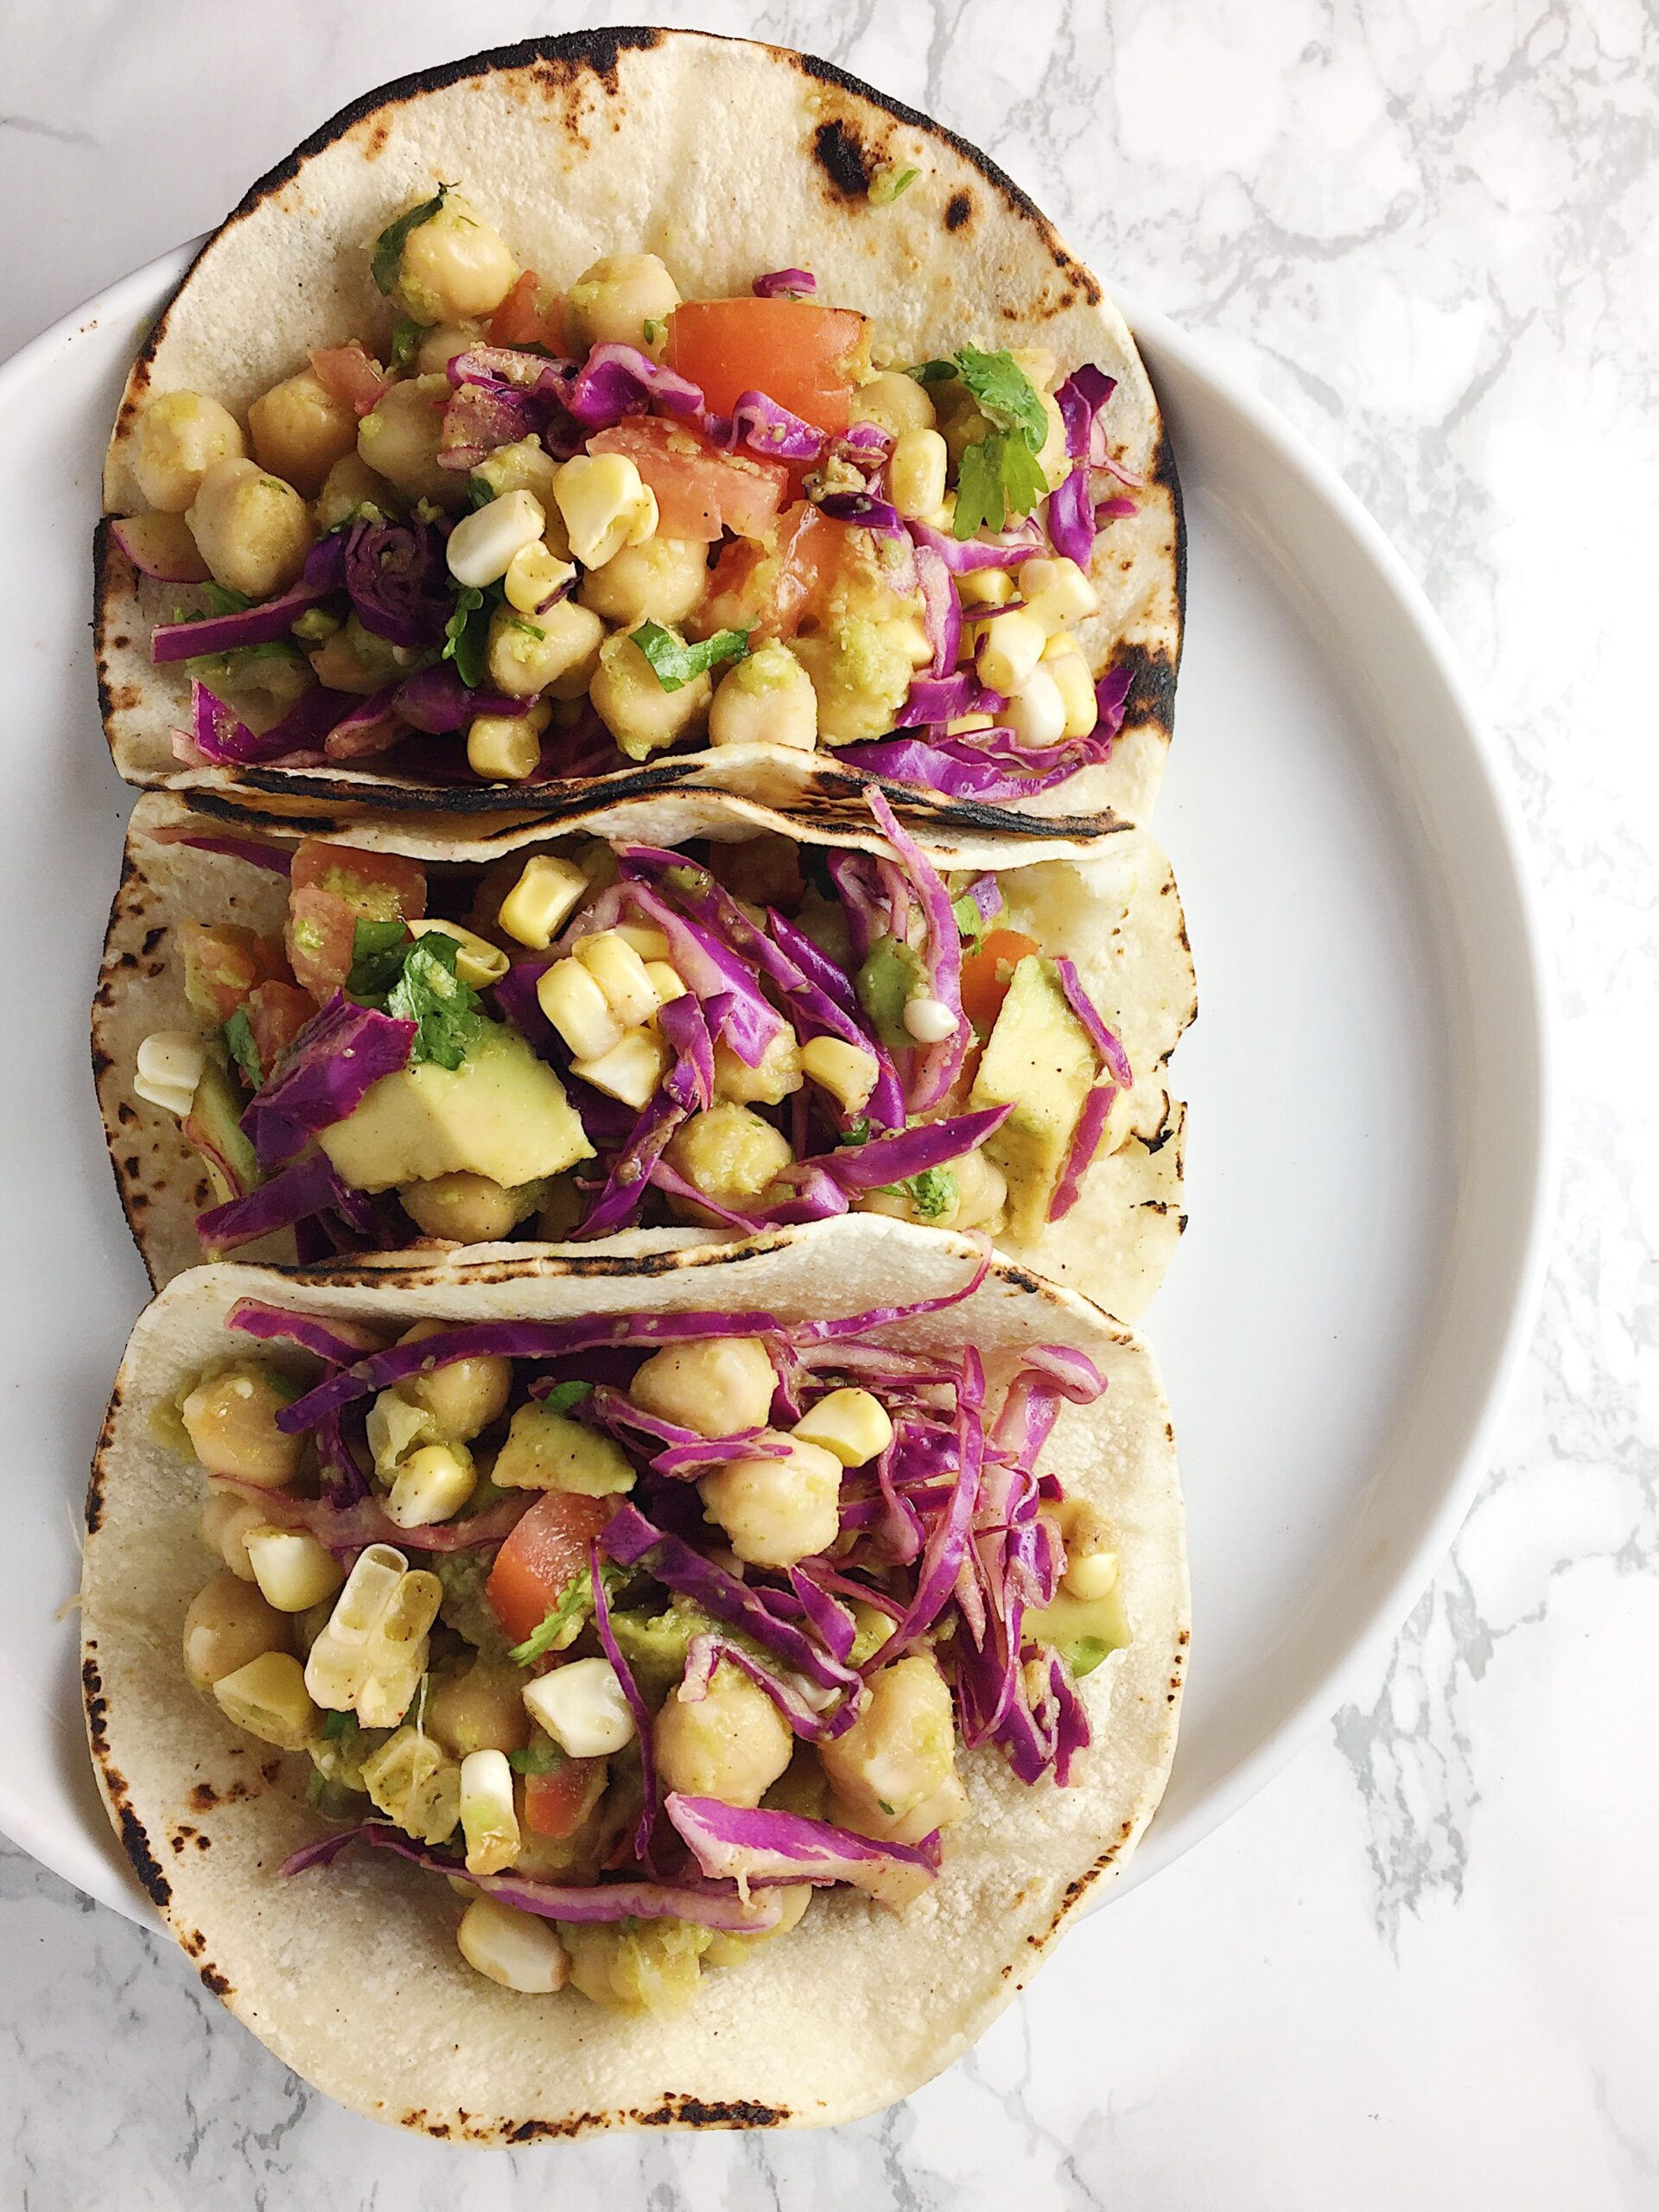 Chickpea tacos for me